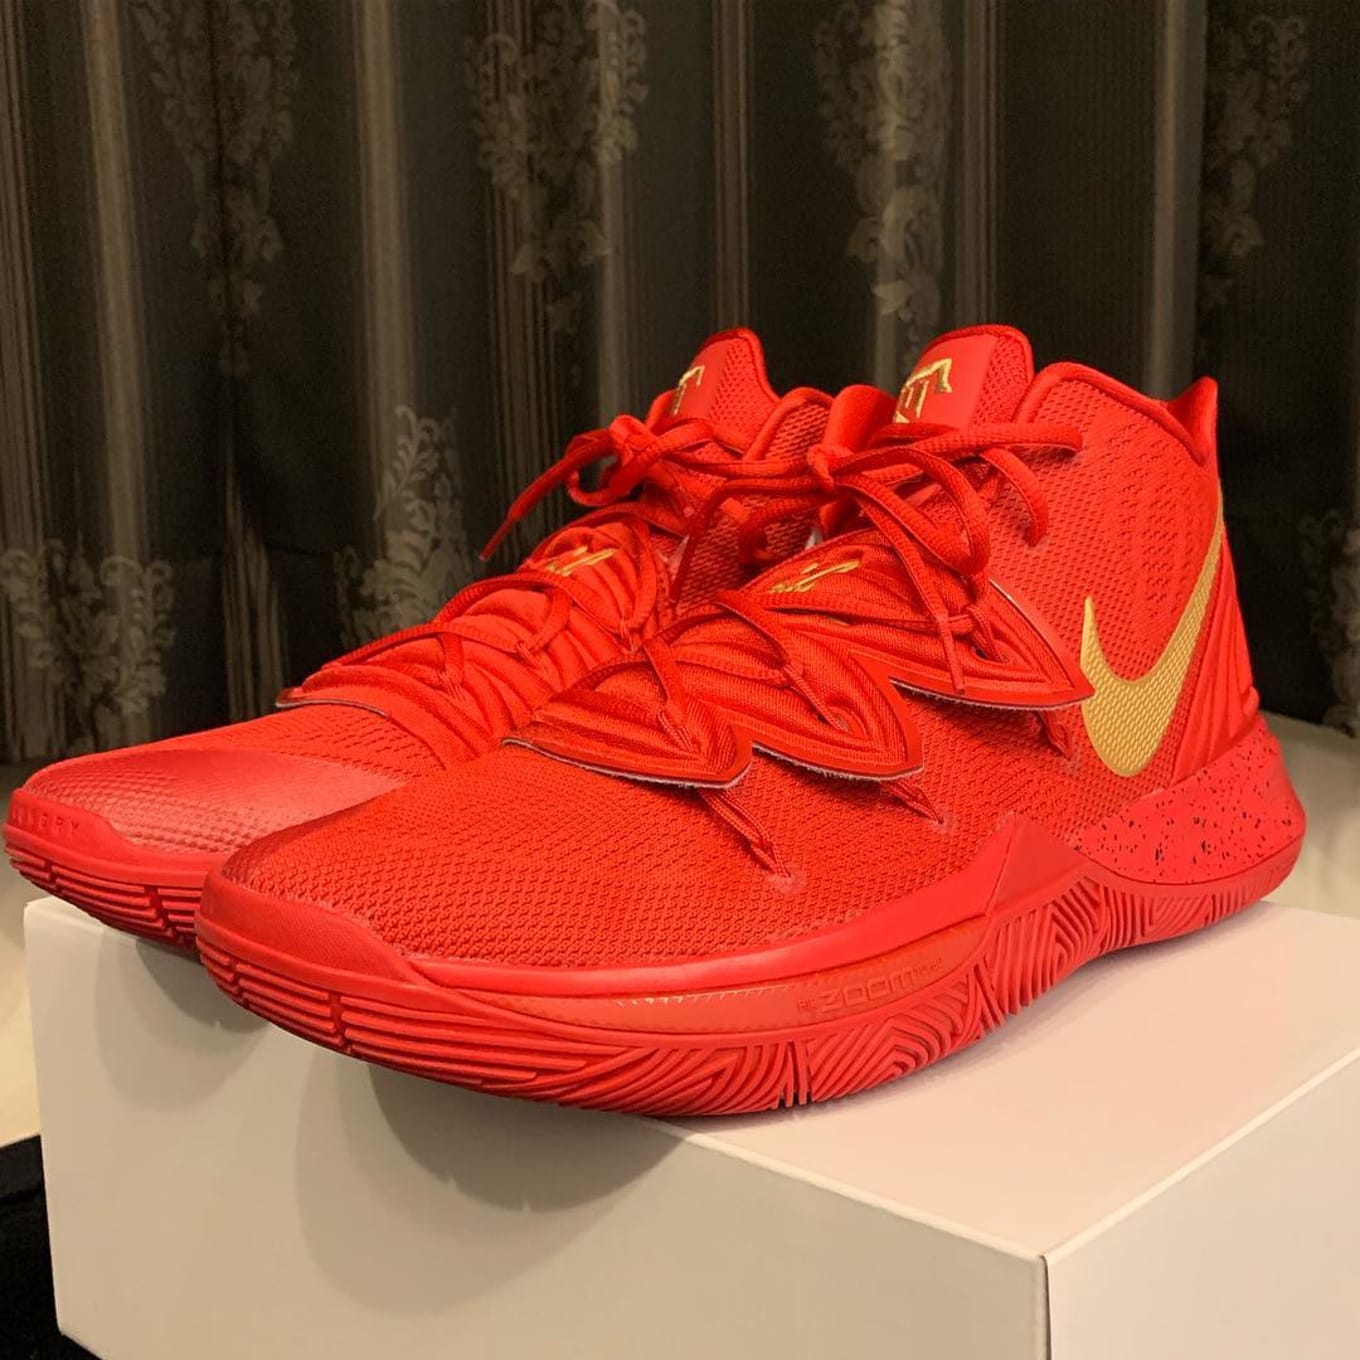 Kyrie 5 Archives WearTesters